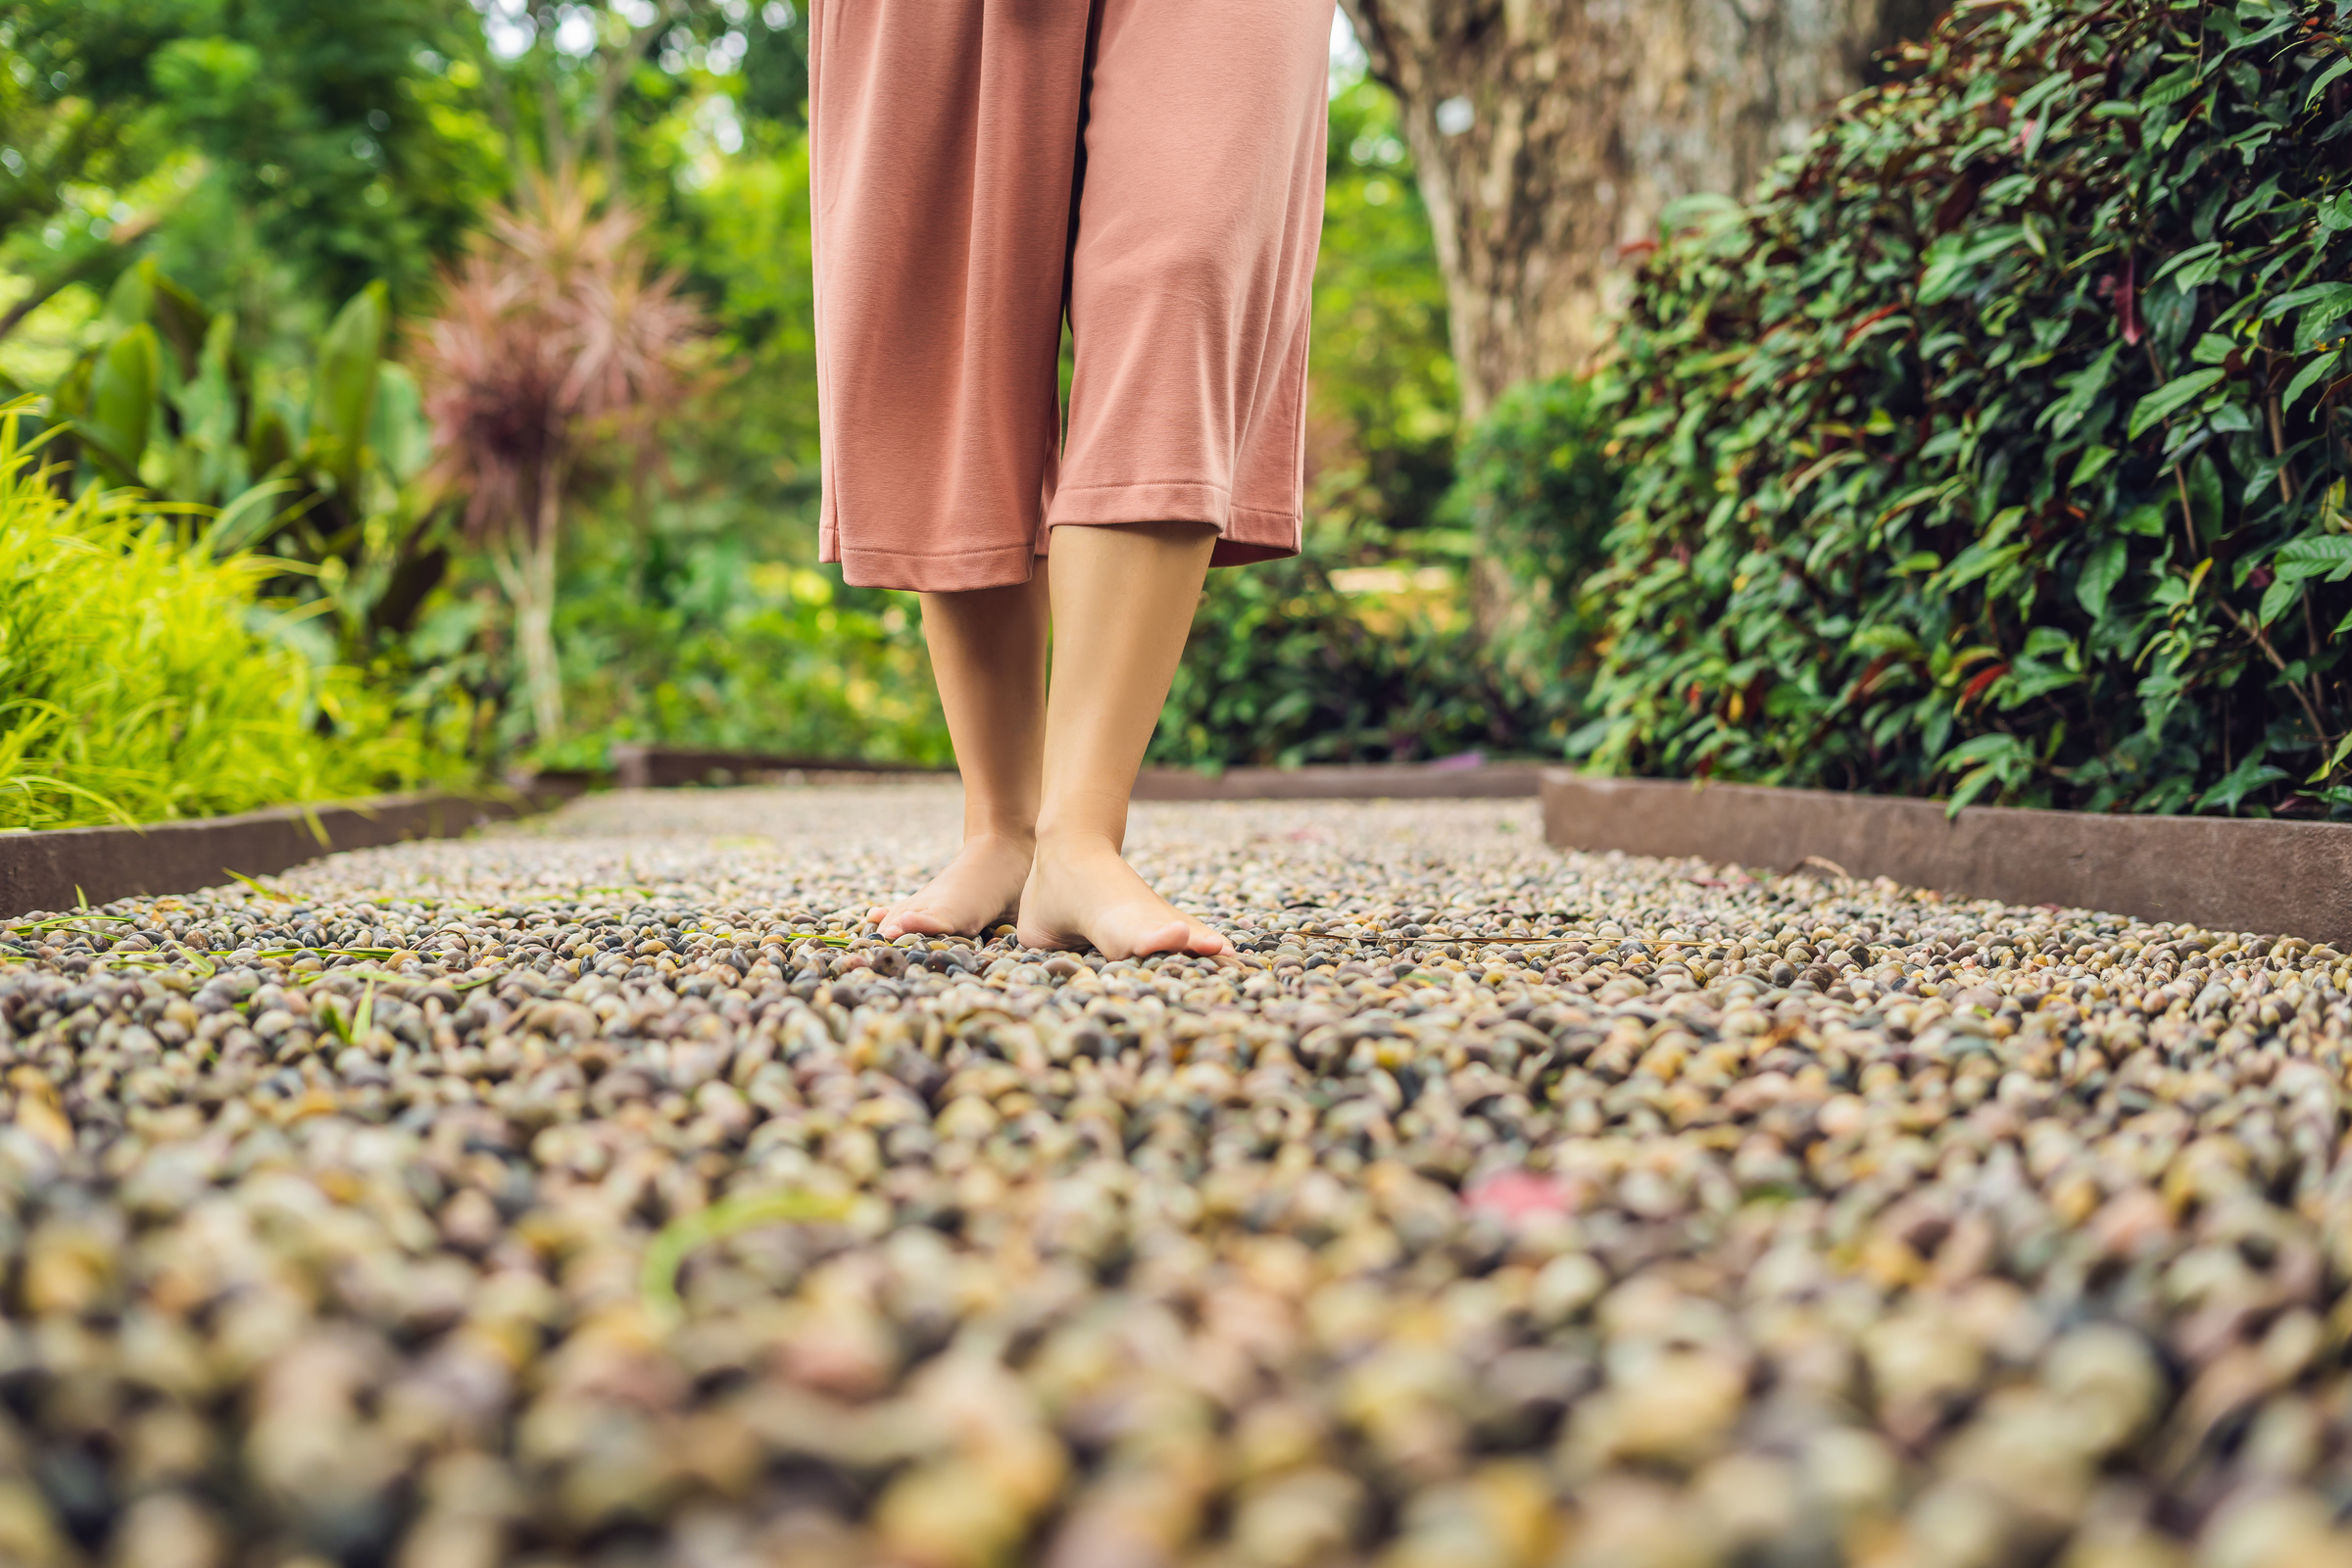 Woman Walking on a Textured Cobble Pavement, Reflexology. Pebble Stones on the Pavement for Foot Reflexology